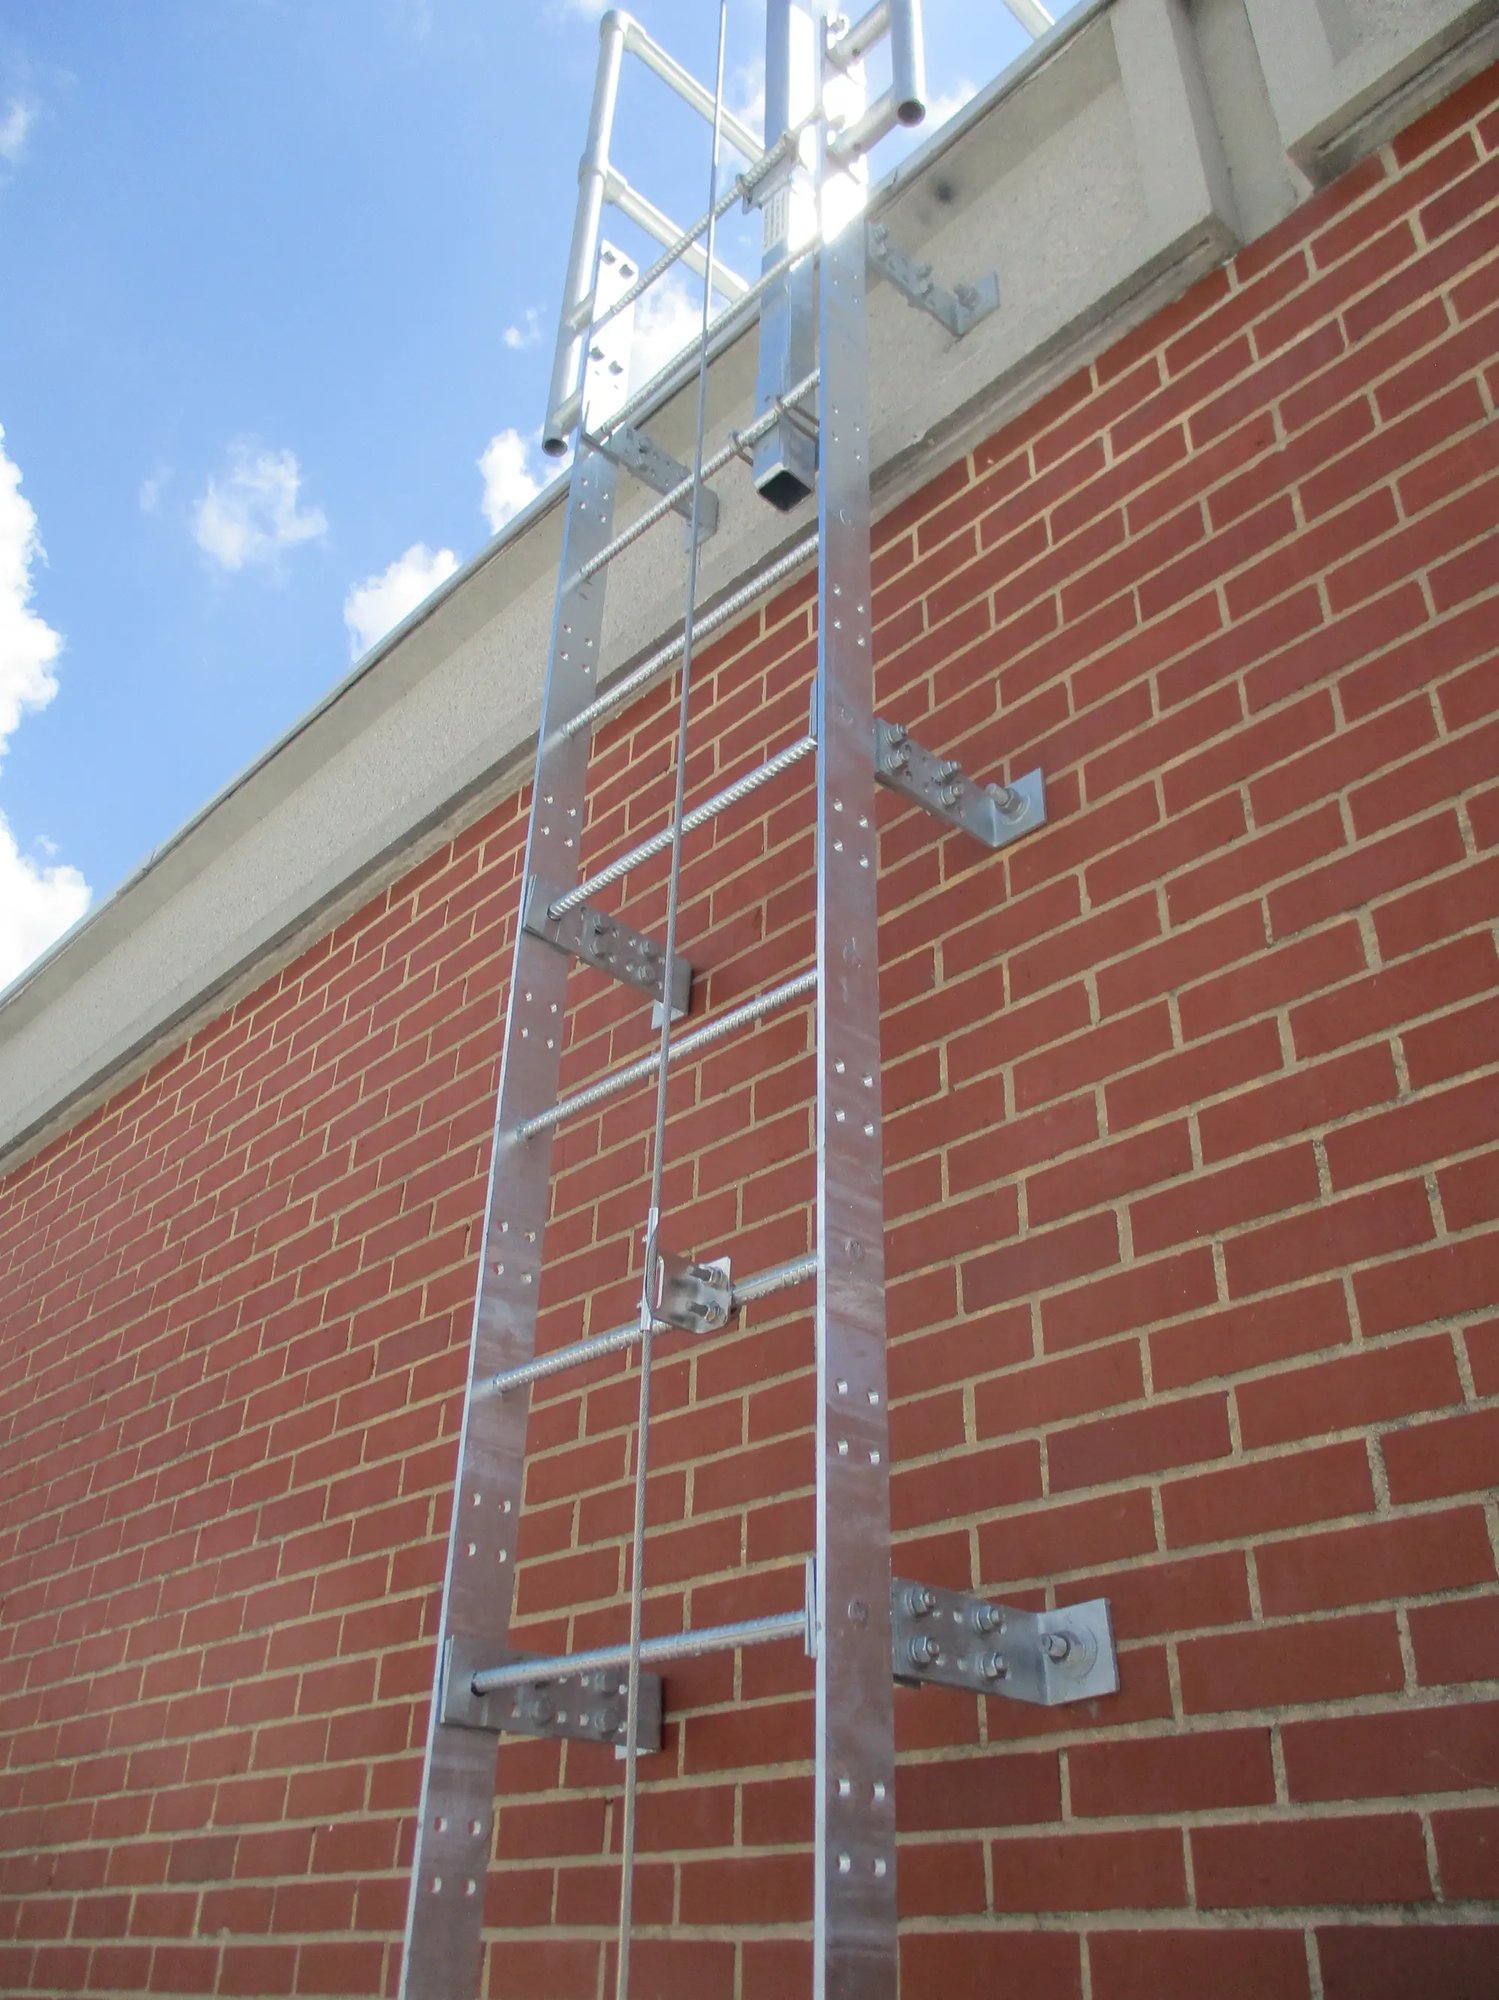 Fixed Ladder with vertical lifeline